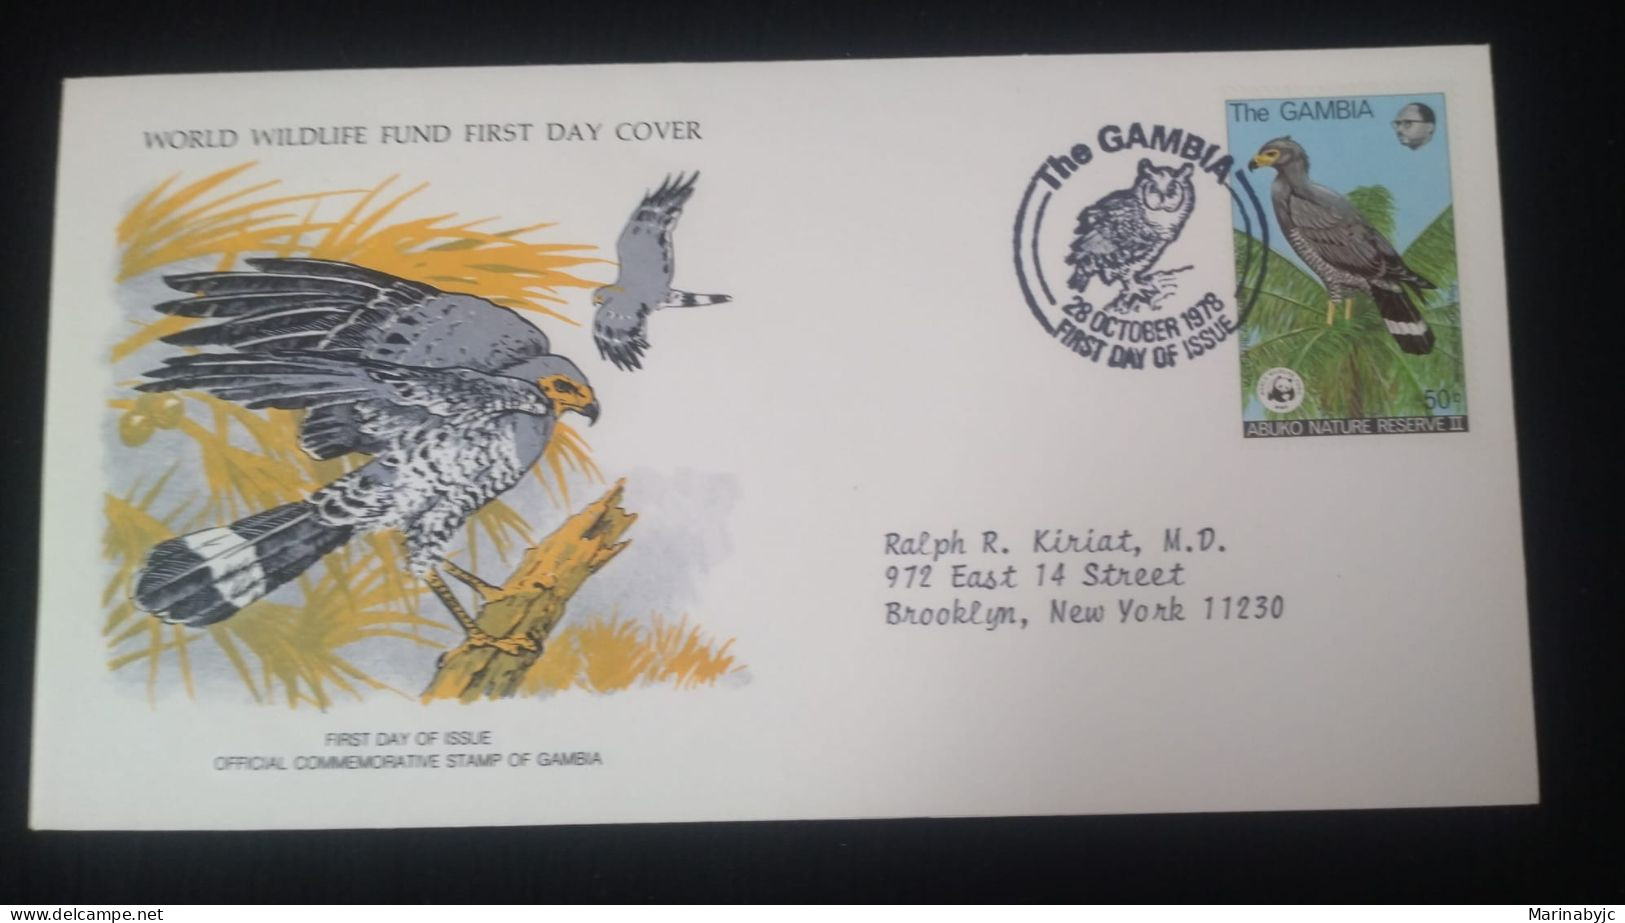 EL)1978 GAMBIA, WORLD WILDLIFE FUND, WWF, ABUKO NATURE RESERVE, AFRICAN FALCON, CIRCULATED TO NEW YORK - USA, FDC - Gambie (1965-...)